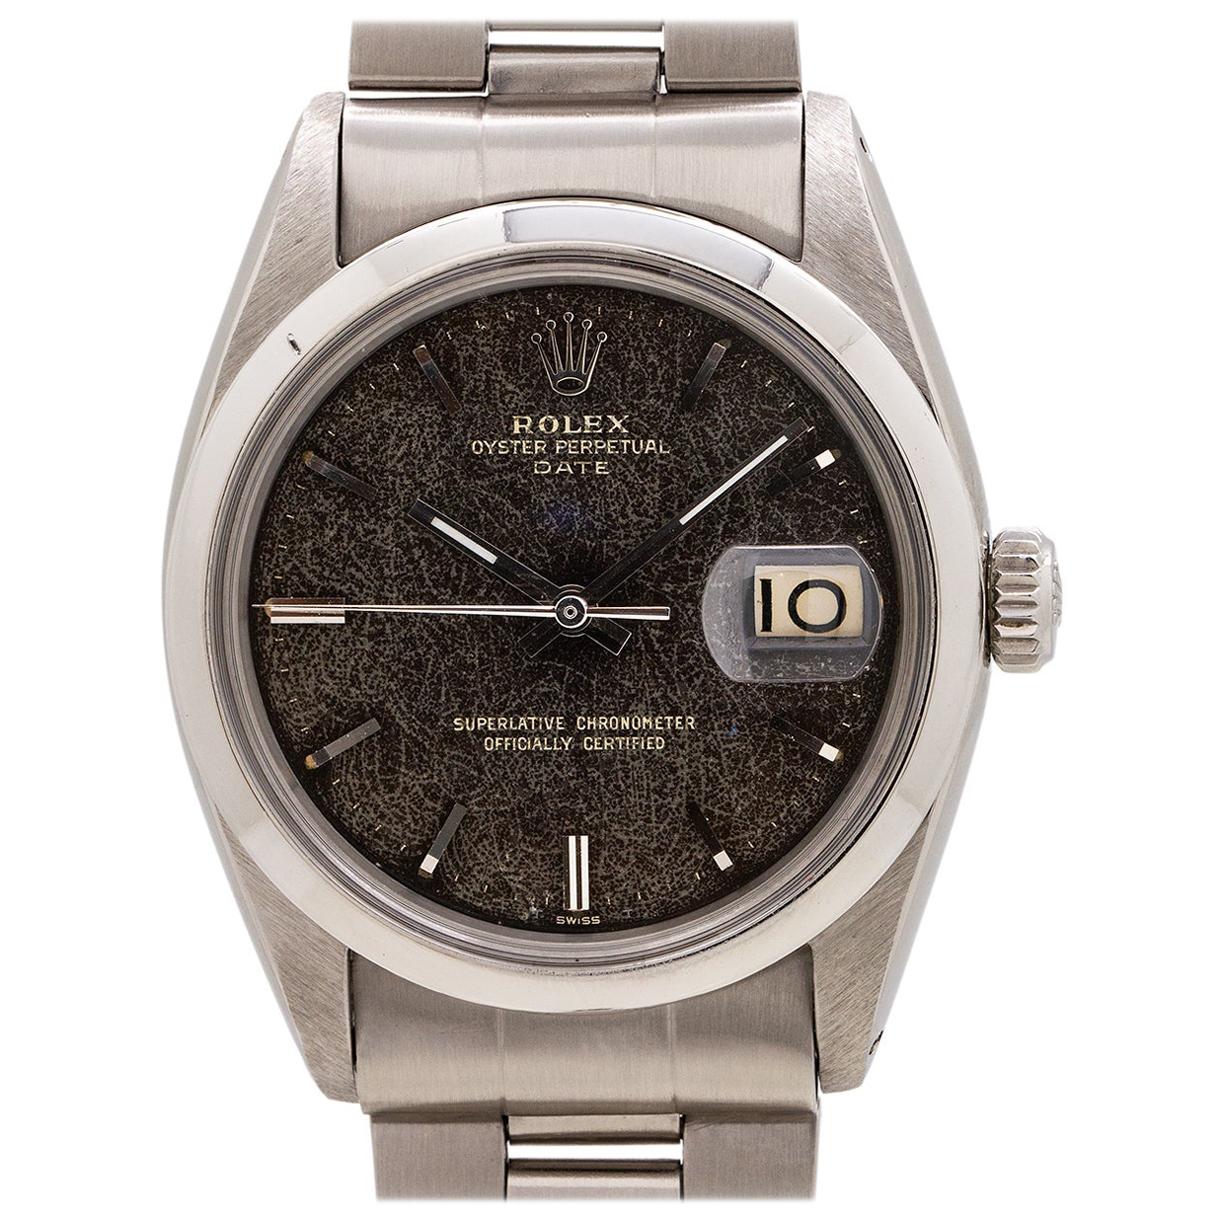 Rolex Oyster Perpetual Date Stainless Ref 1500 Gilt "Leopard" Dial, circa 1959